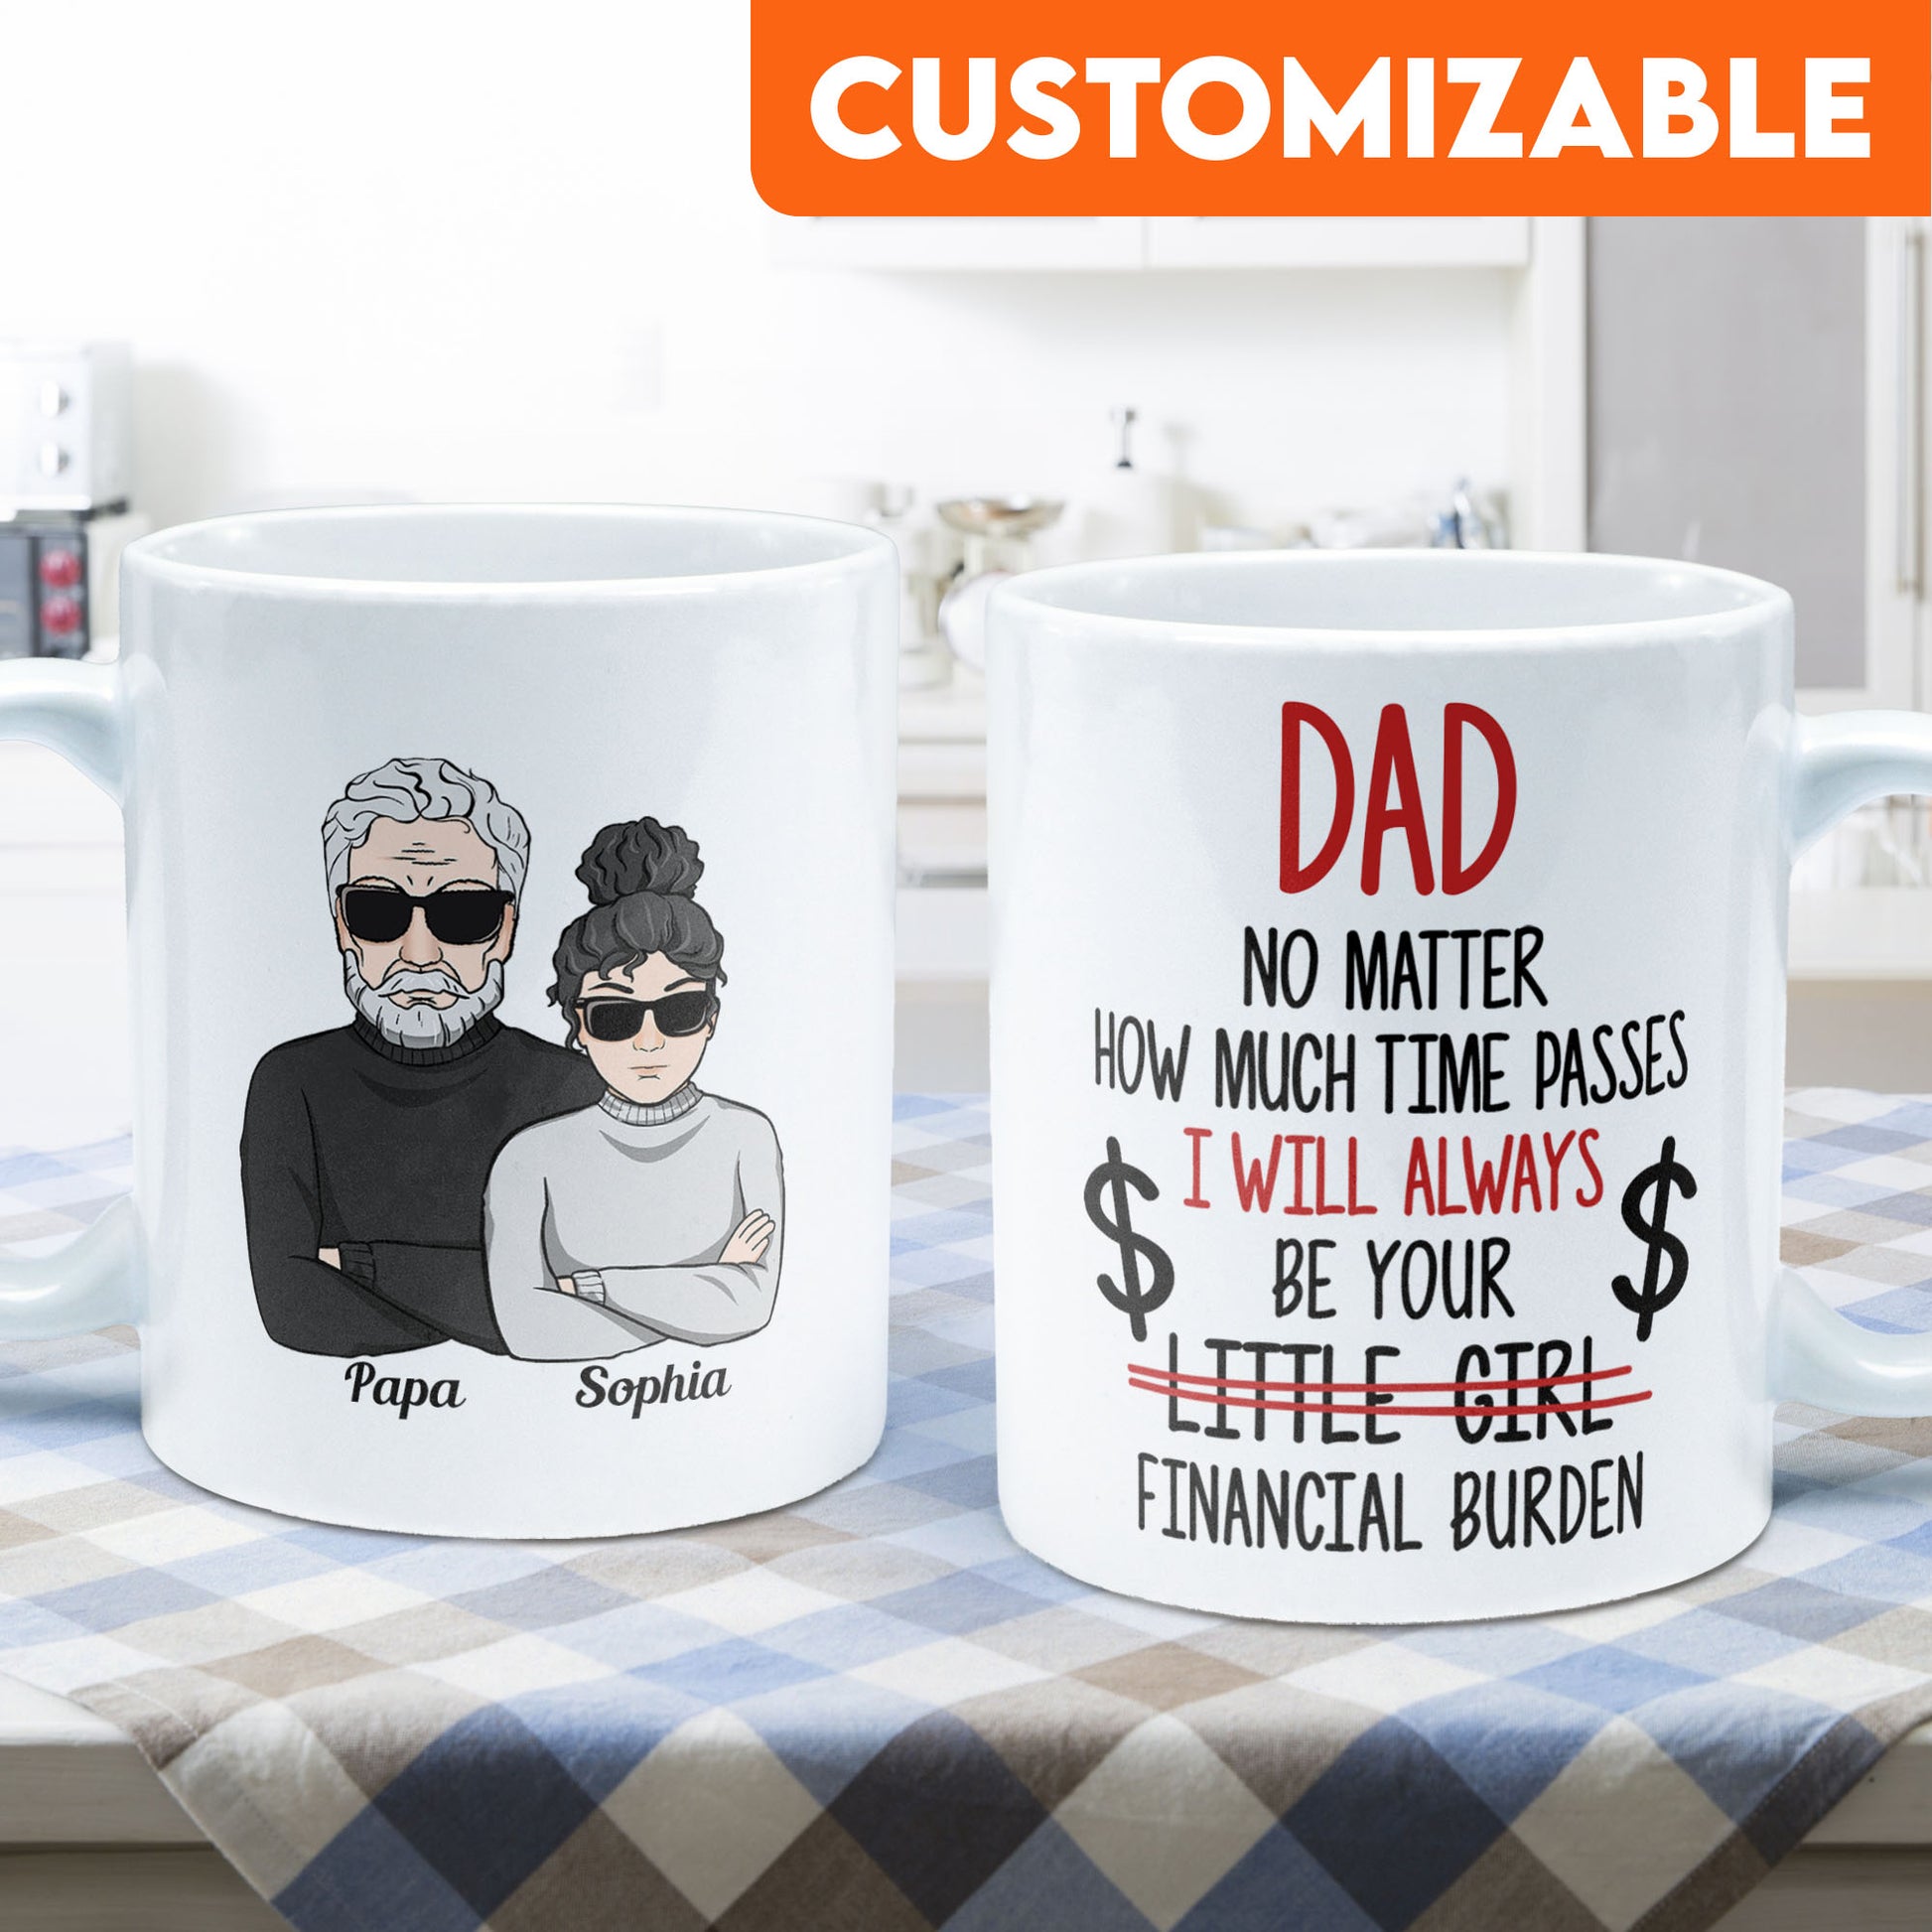 Personalized Dad and Grandpa Gifts Father's Day Gift M 628 Husband